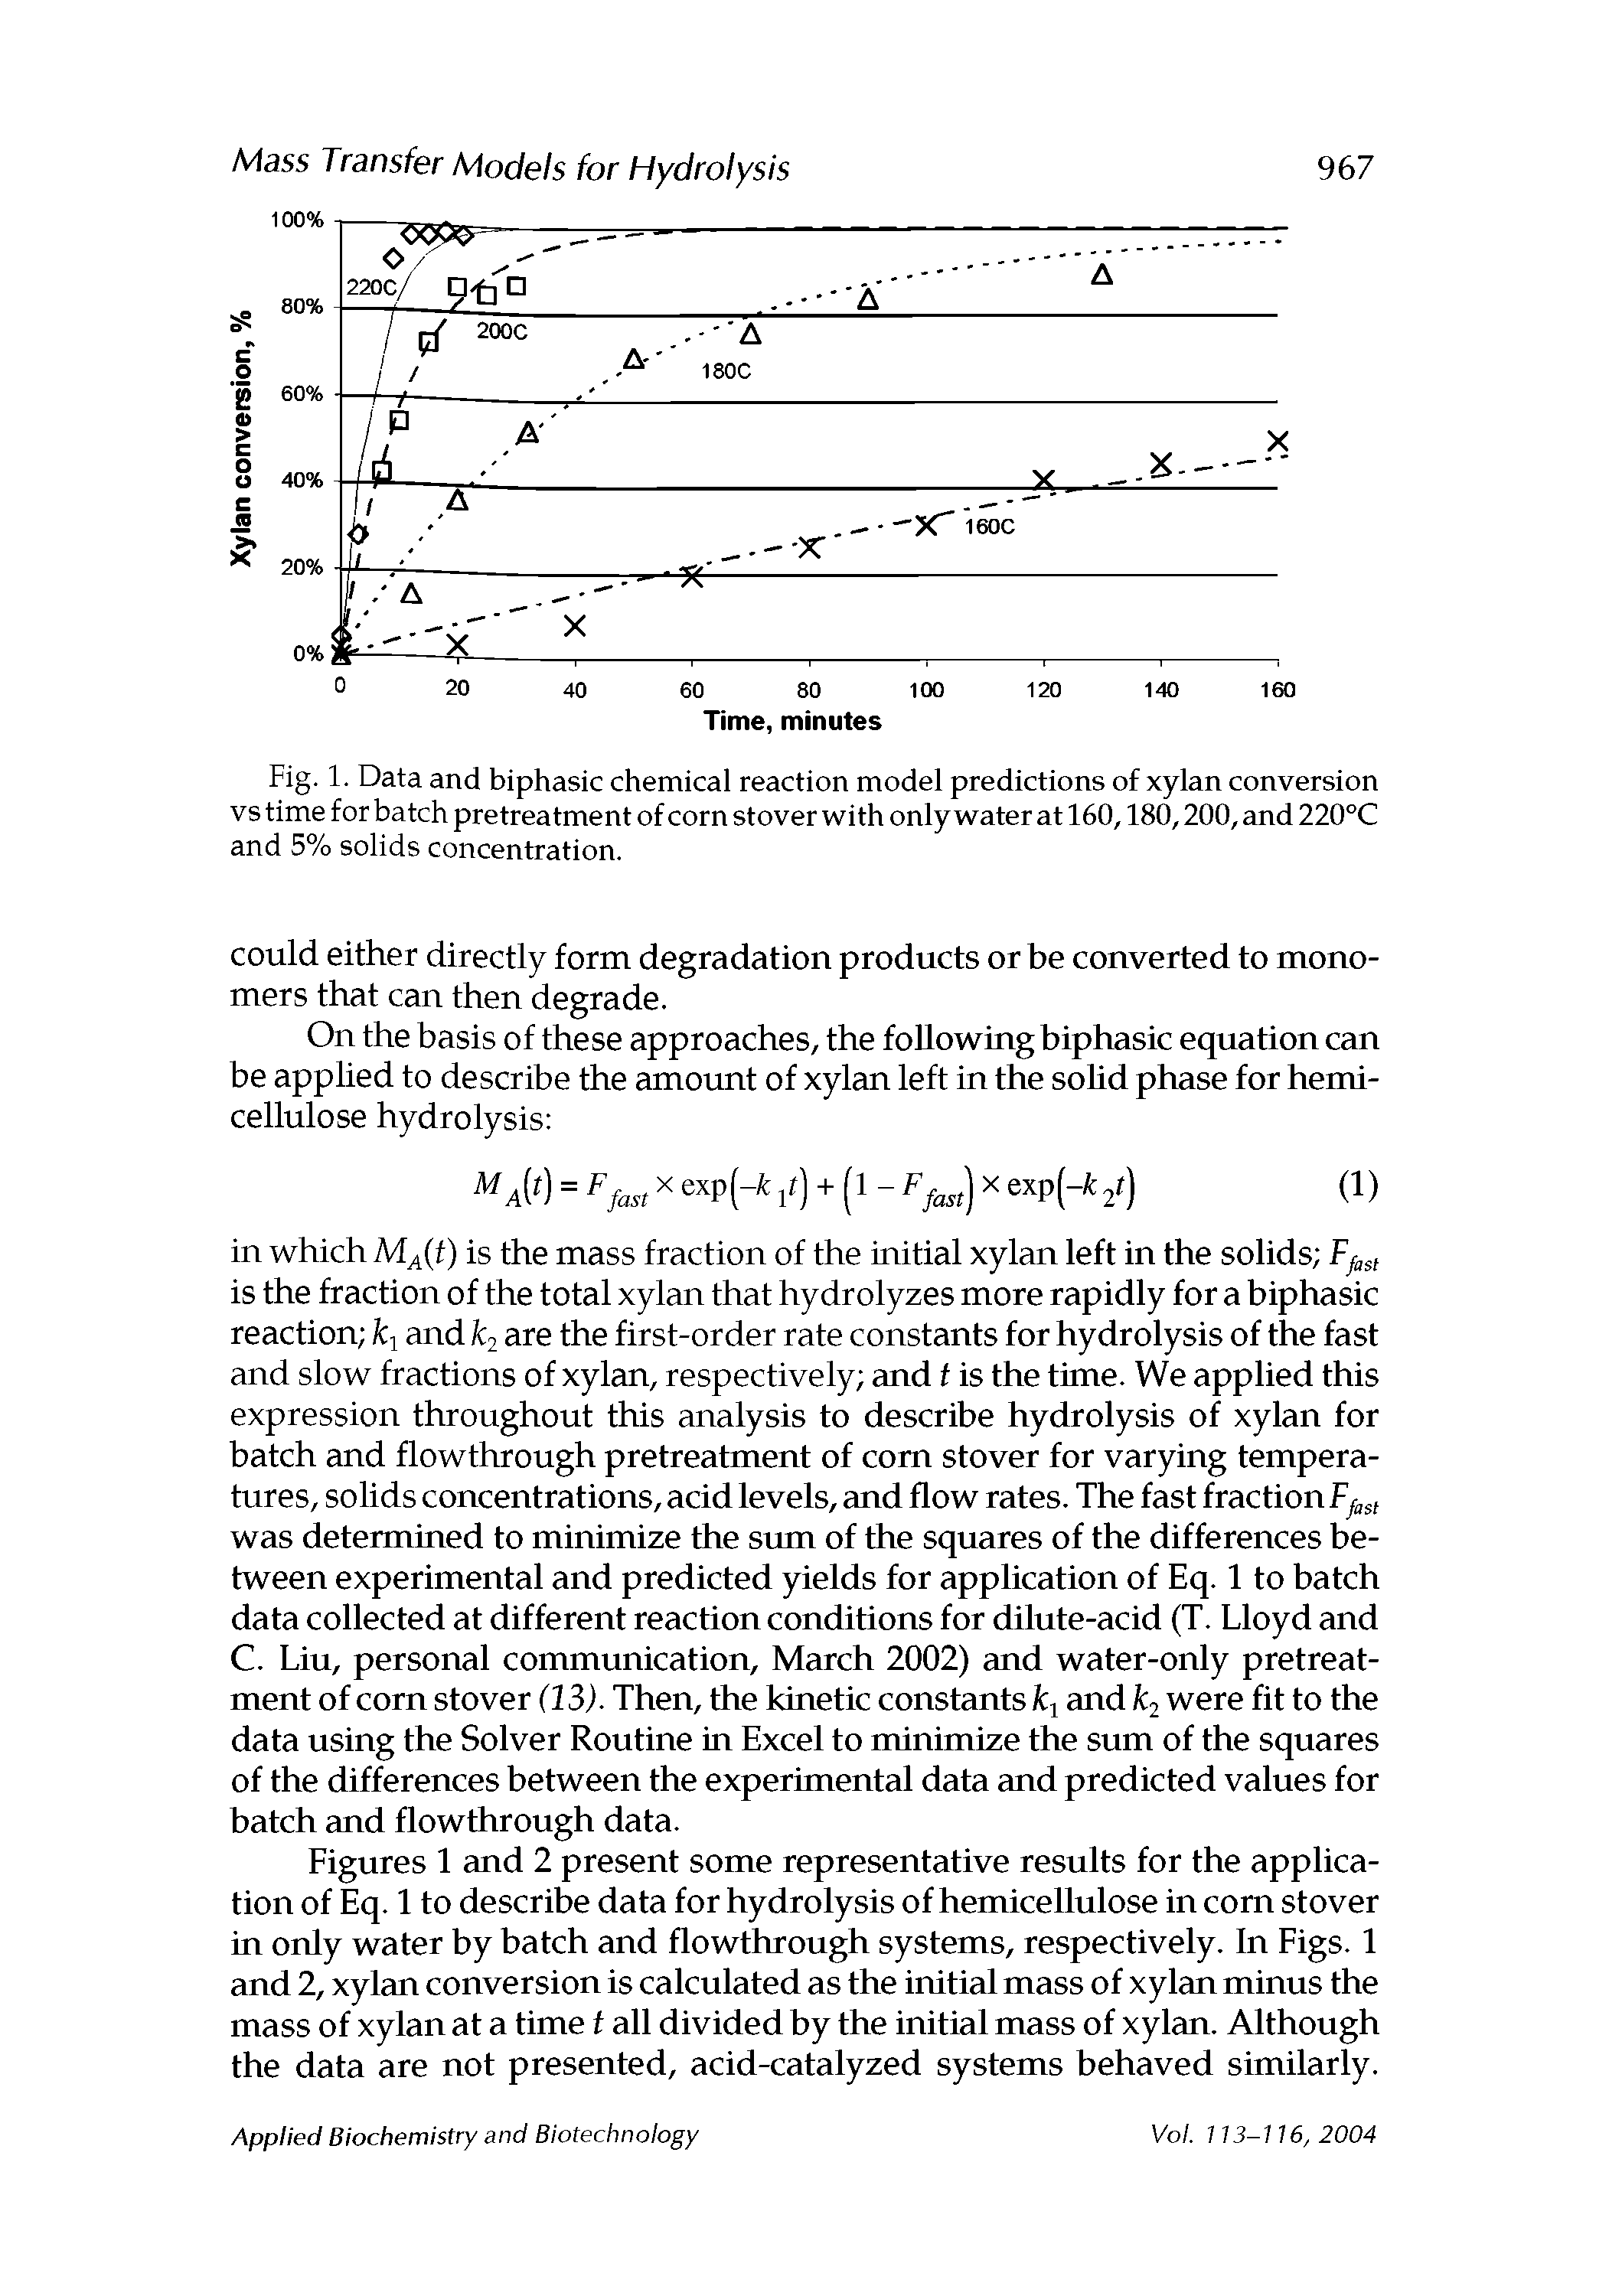 Figures 1 and 2 present some representative results for the application of Eq. 1 to describe data for hydrolysis of hemicellulose in corn stover in only water by batch and flowthrough systems, respectively. In Figs. 1 and 2, xylan conversion is calculated as the initial mass of xylan minus the mass of xylan at a time t all divided by the initial mass of xylan. Although the data are not presented, acid-catalyzed systems behaved similarly.